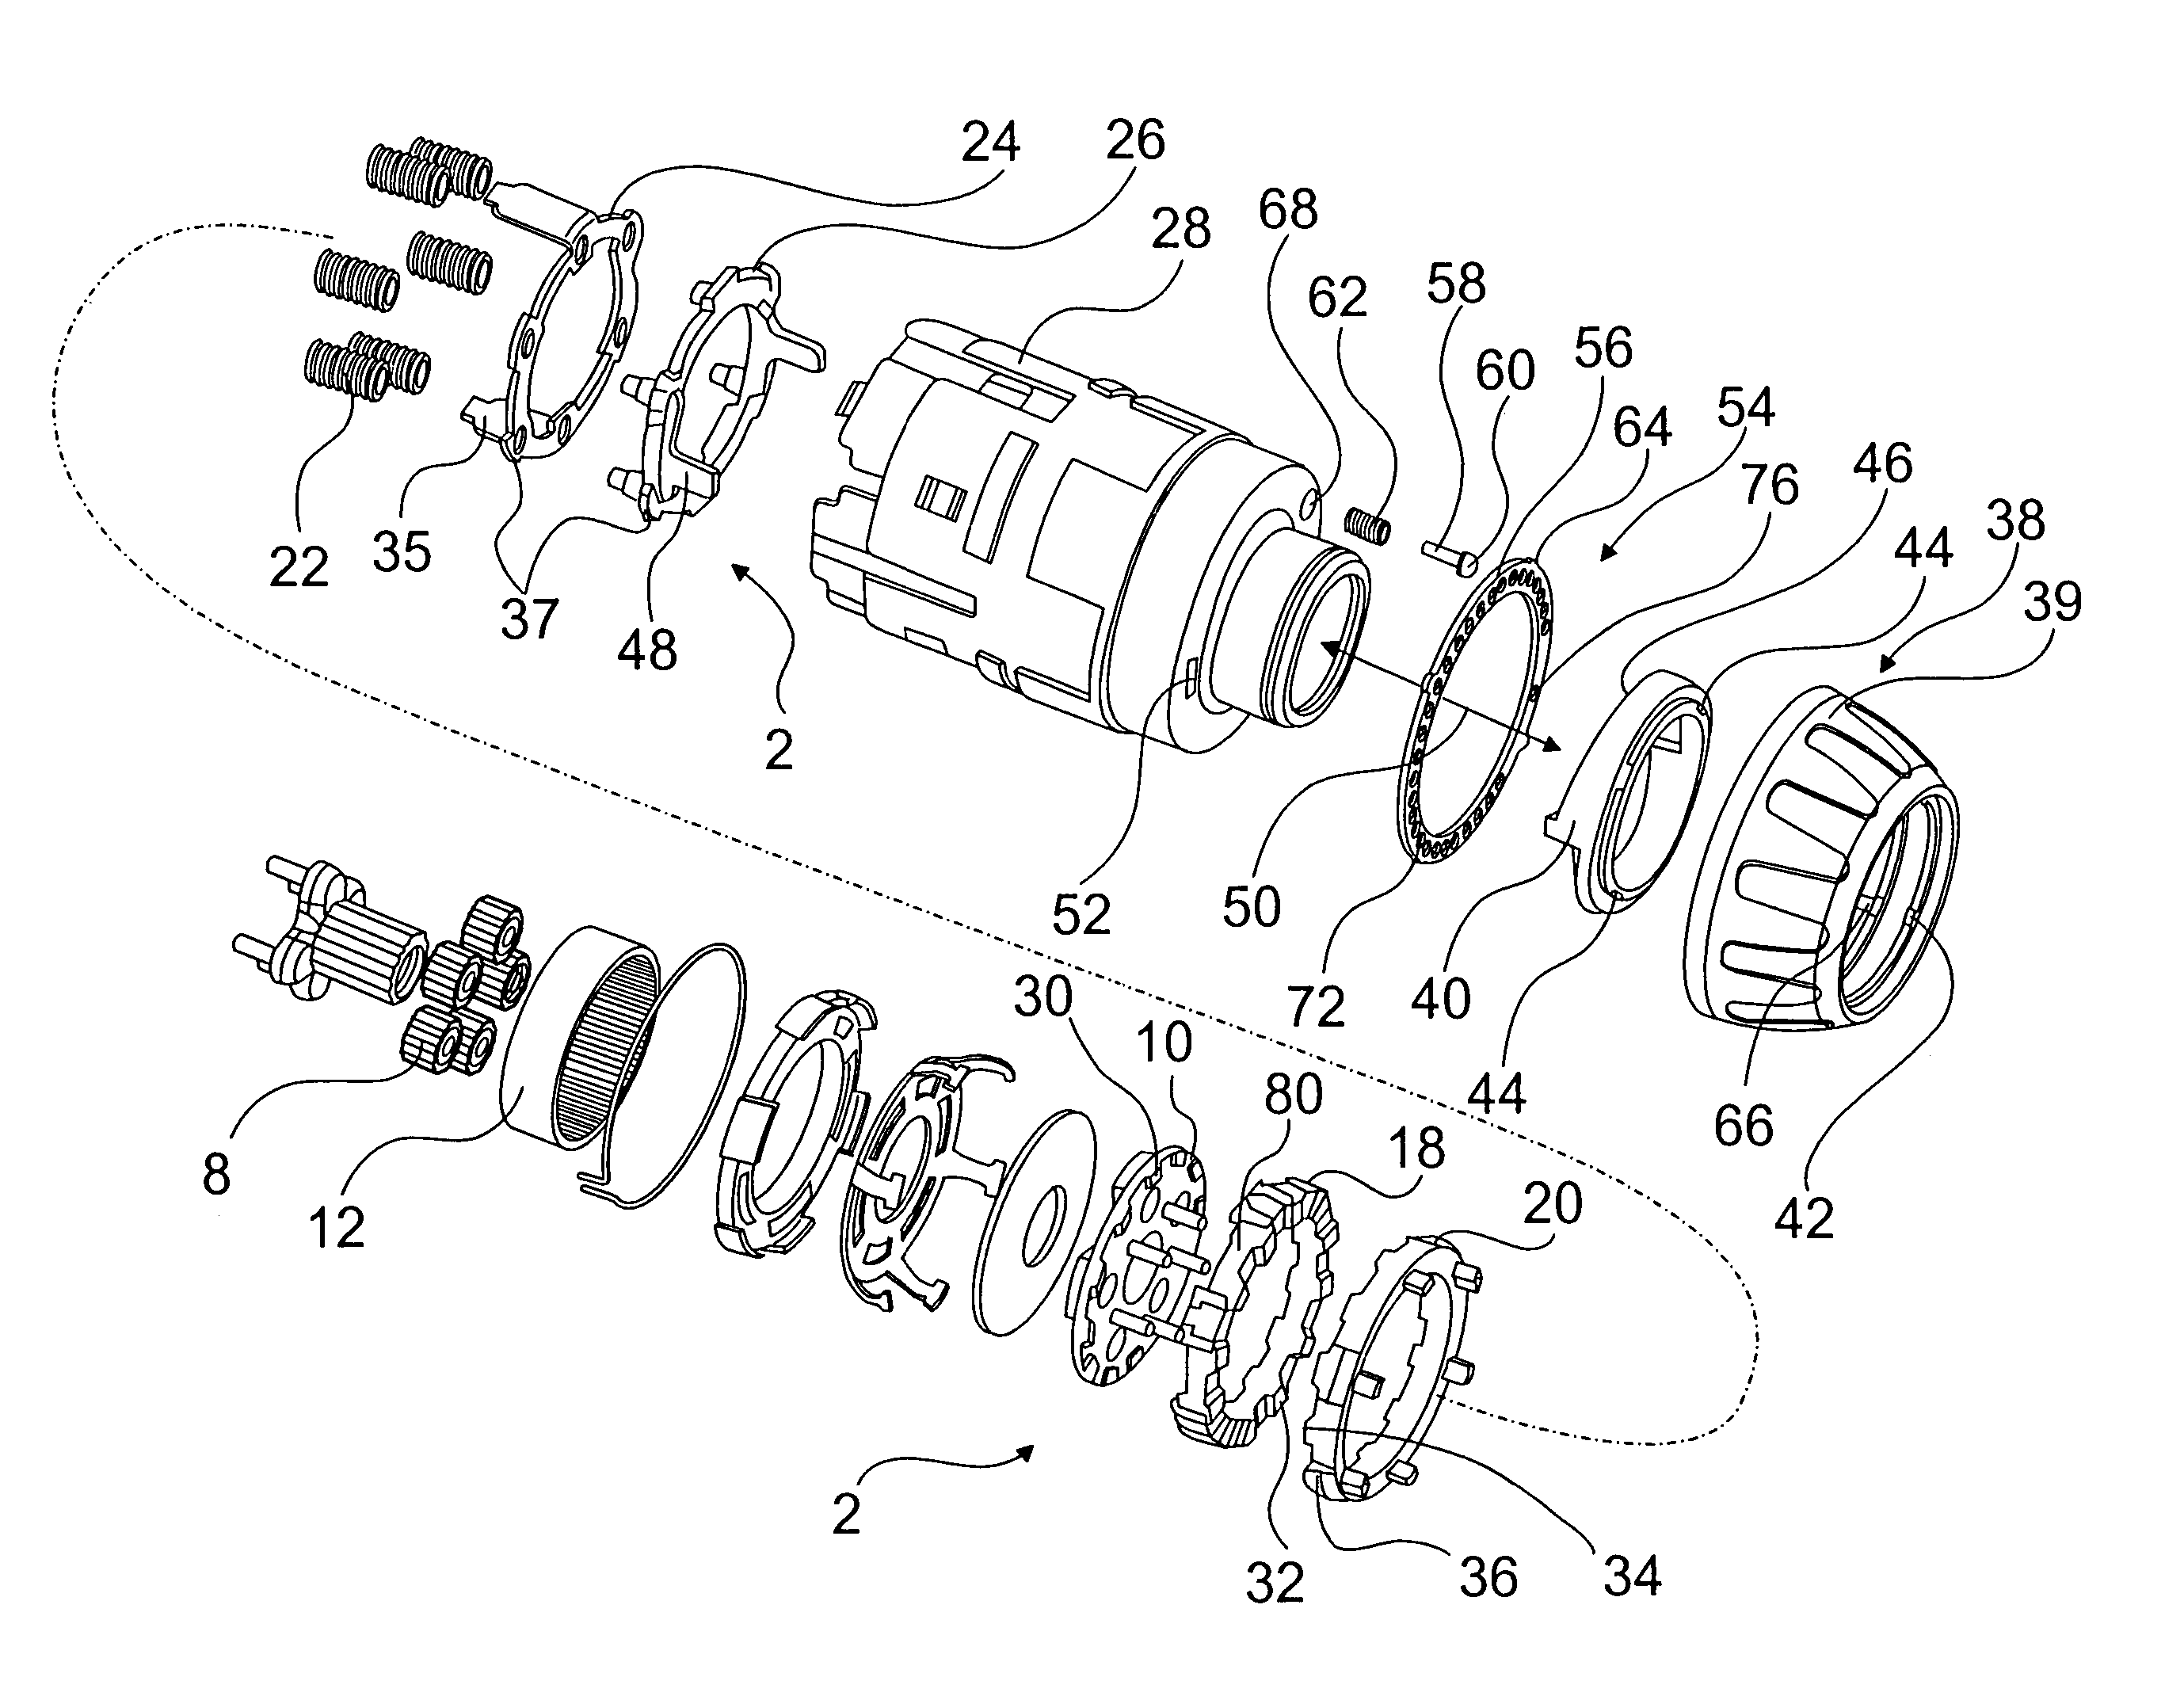 Hand-held power tool with a torque-limiting unit